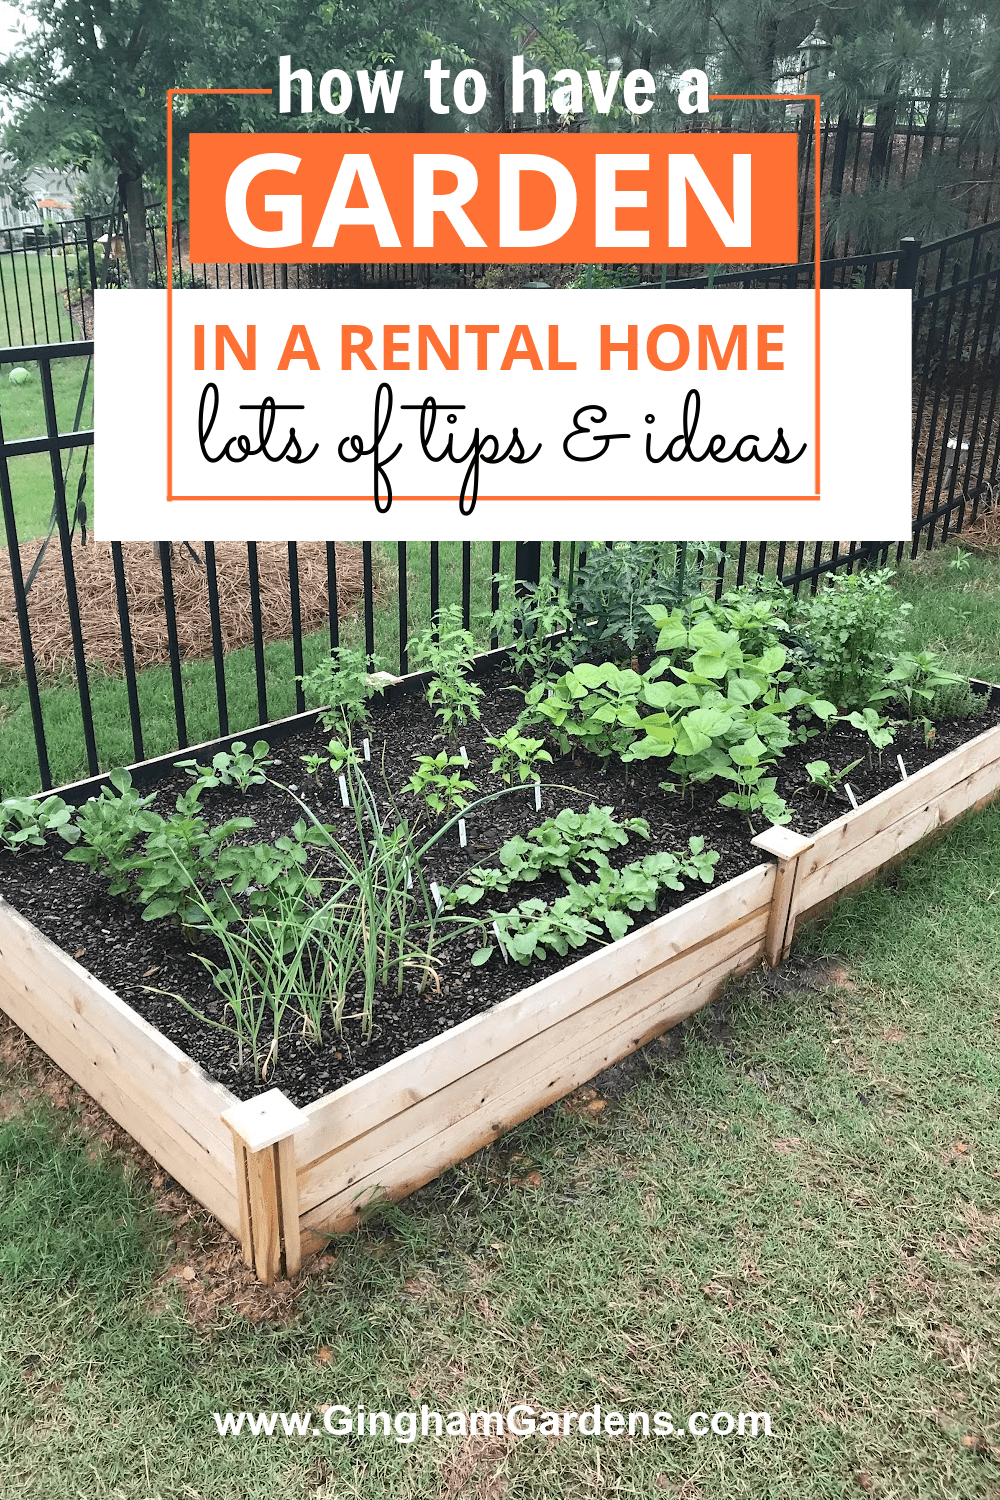 Image of a raised bed garden with text overlay - how to have a garden in a rental home